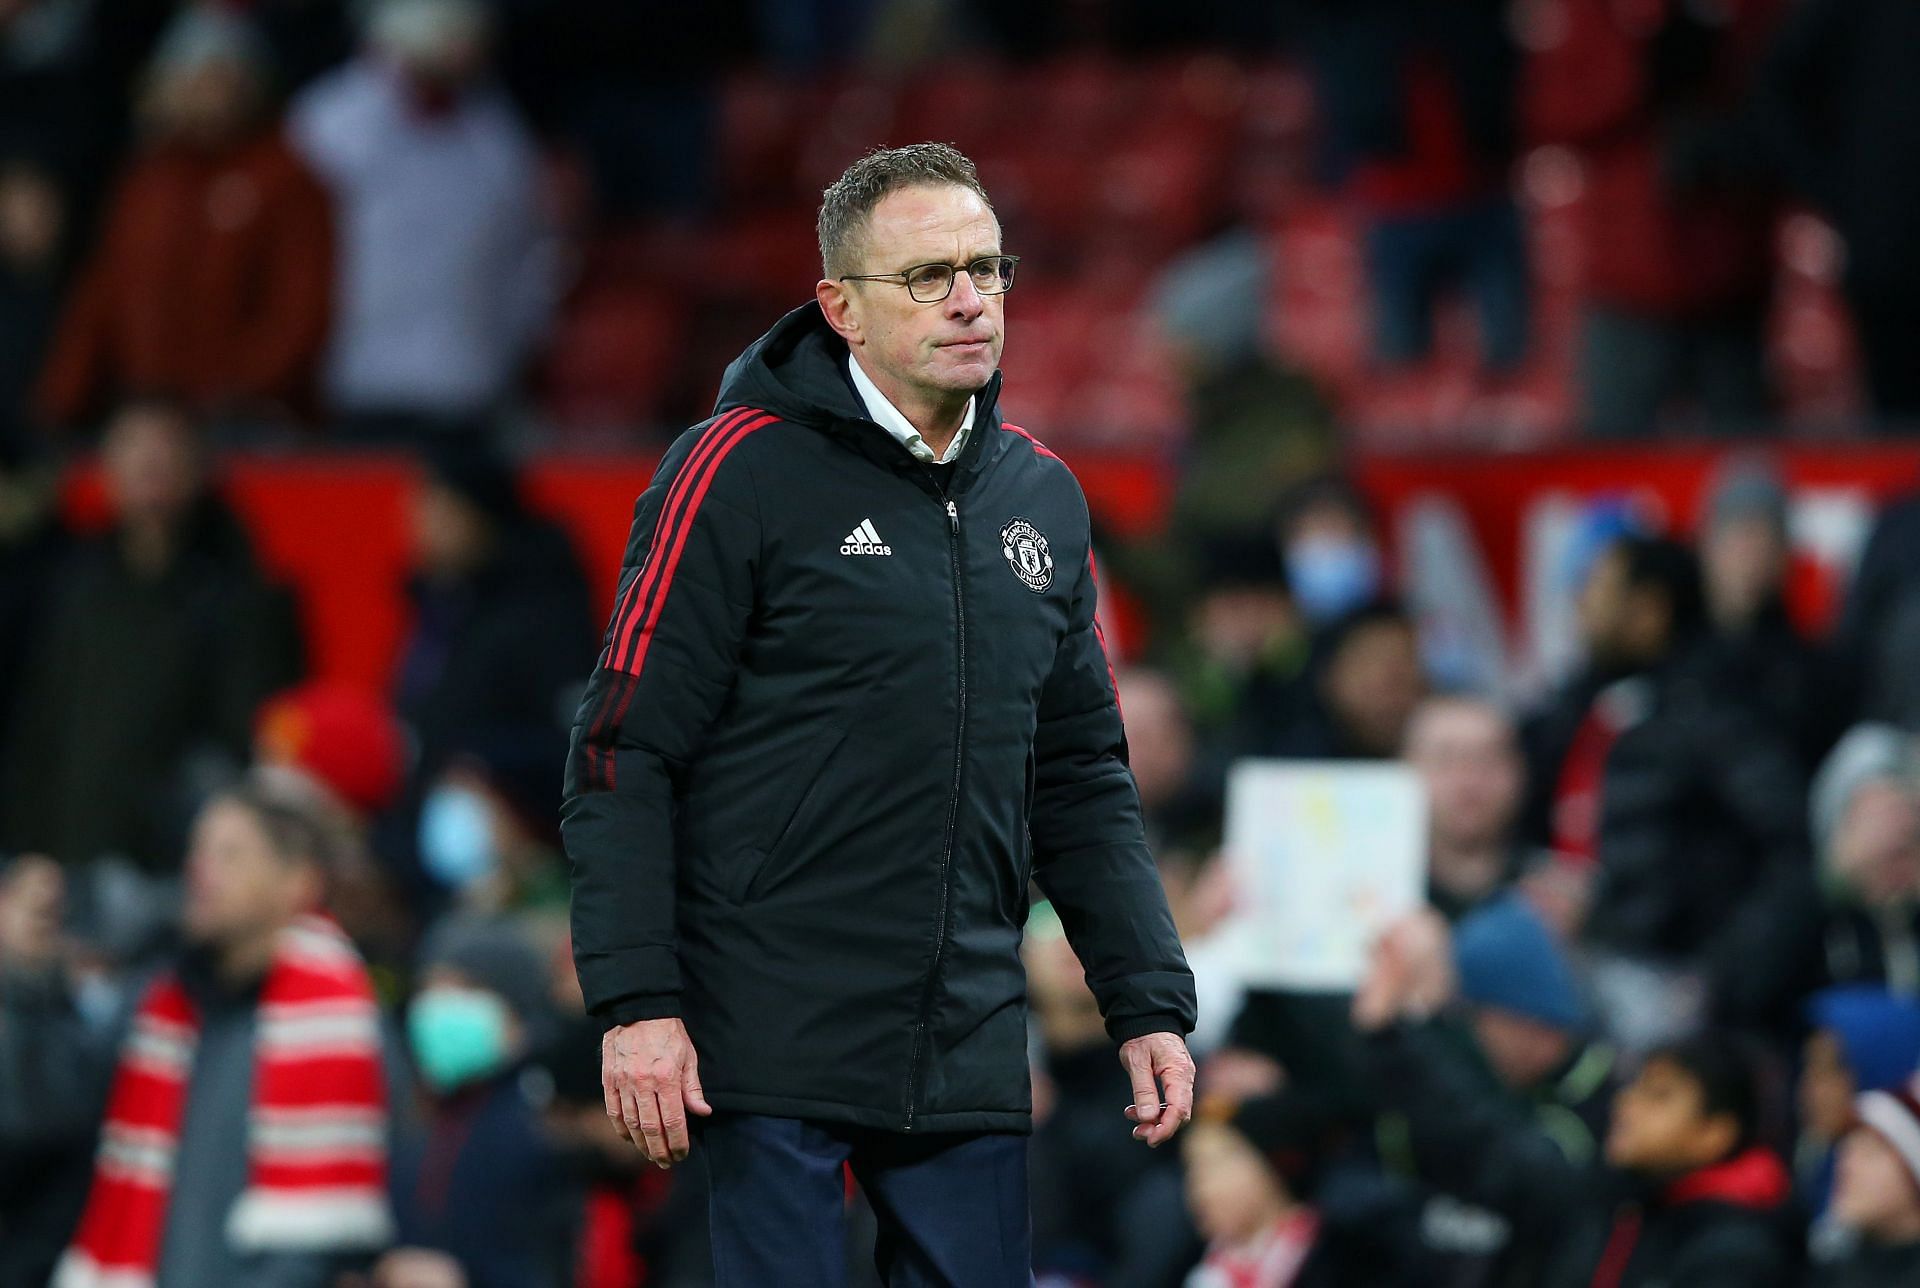 Manchester United manager Ralf Rangnick. (Photo by Alex Livesey/Getty Images).